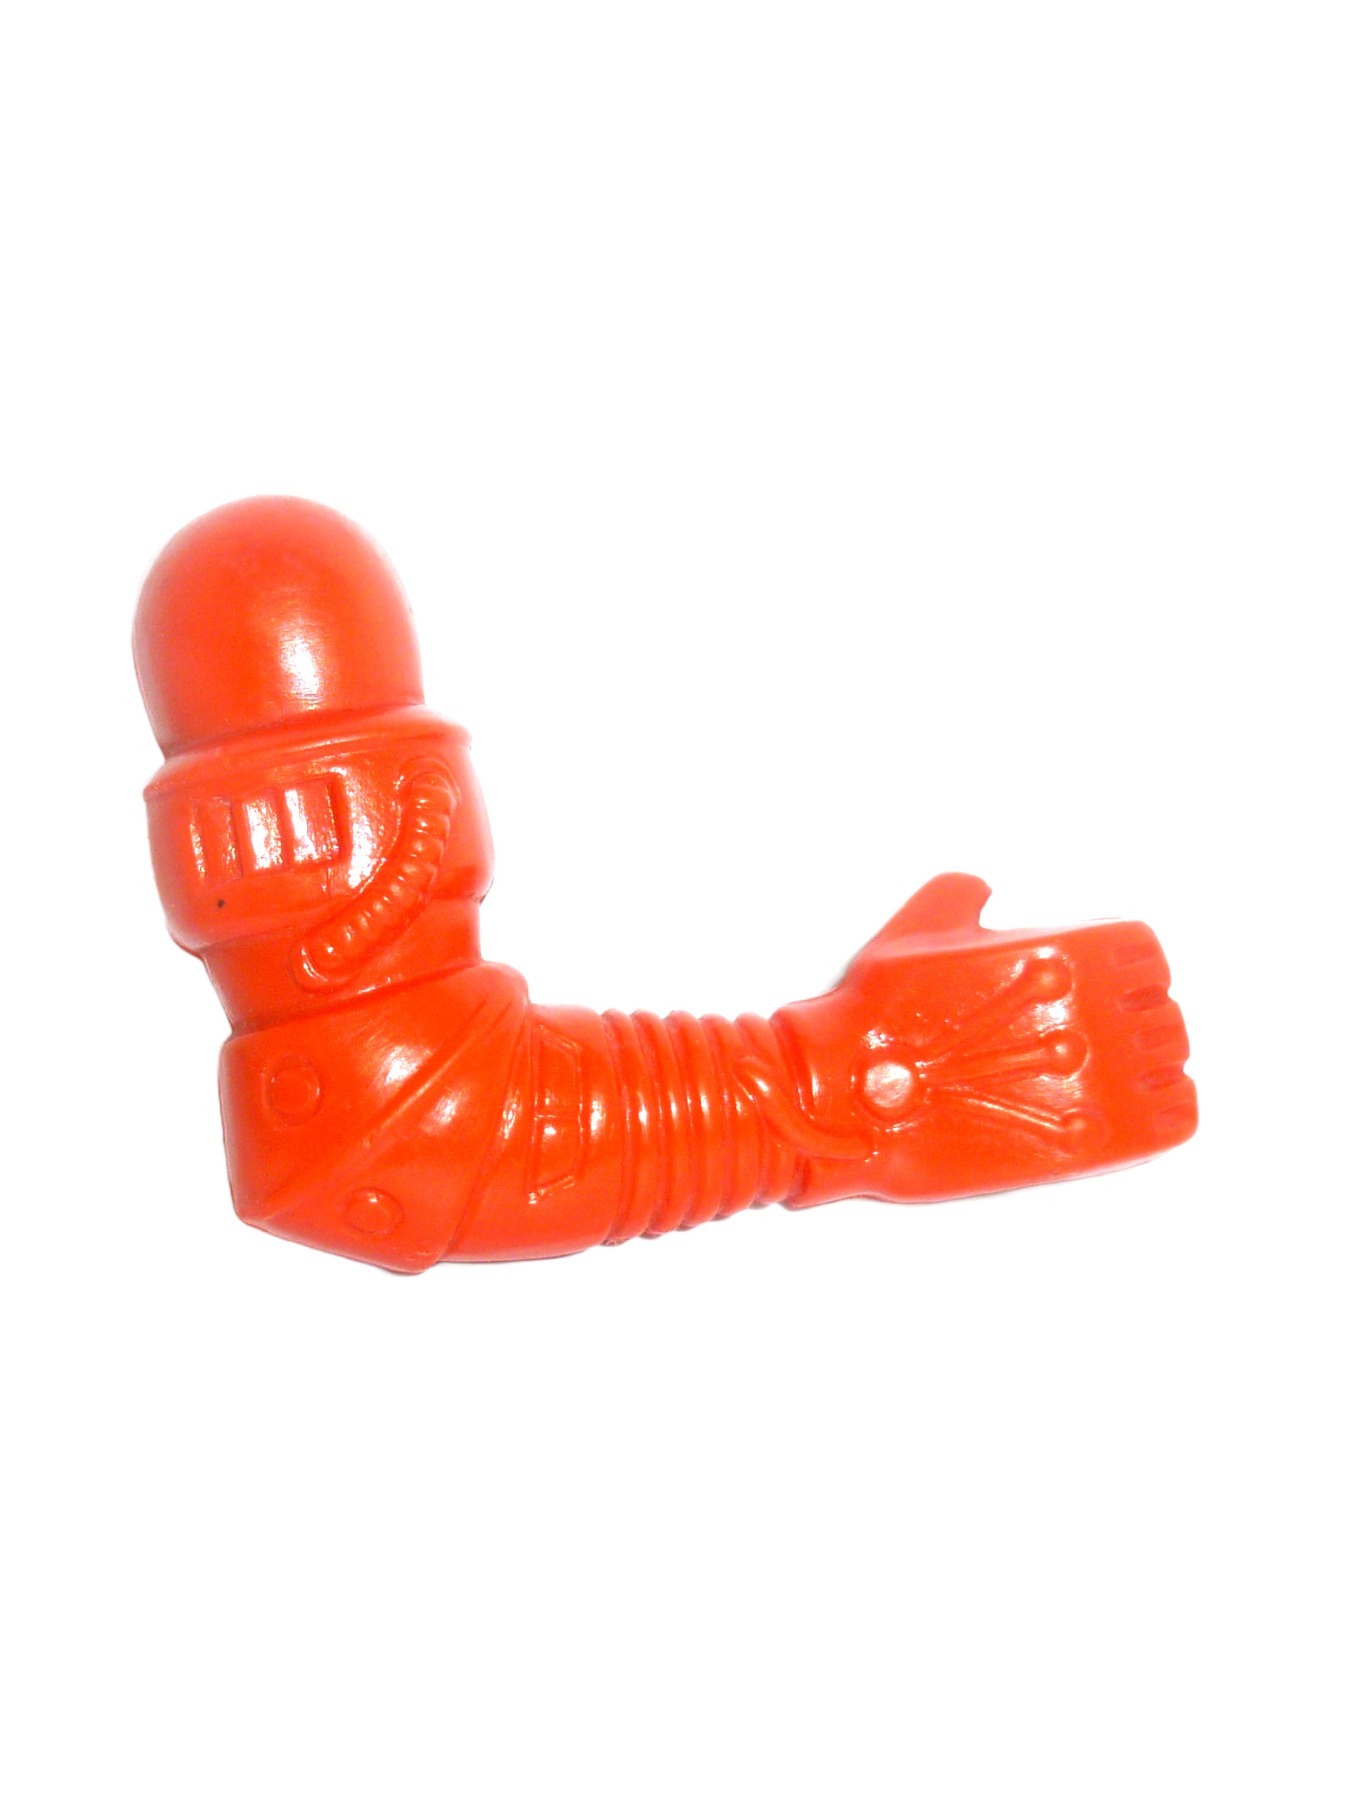 Multi-Bot - right red arm - spare part